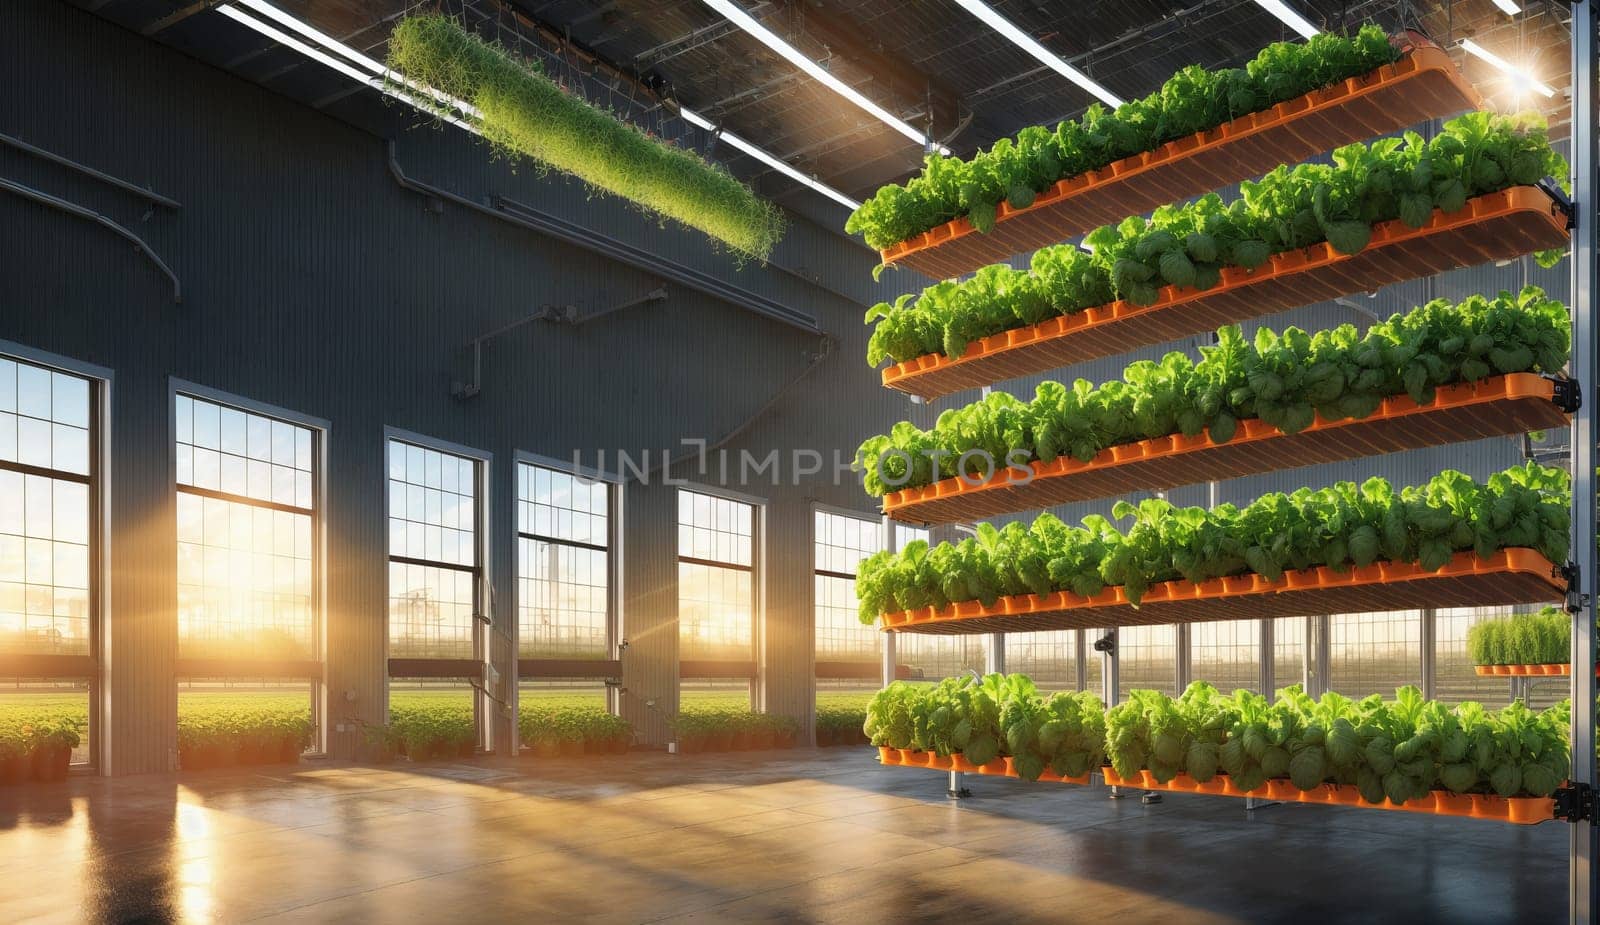 Building with many windows, walls covered in plants by DCStudio